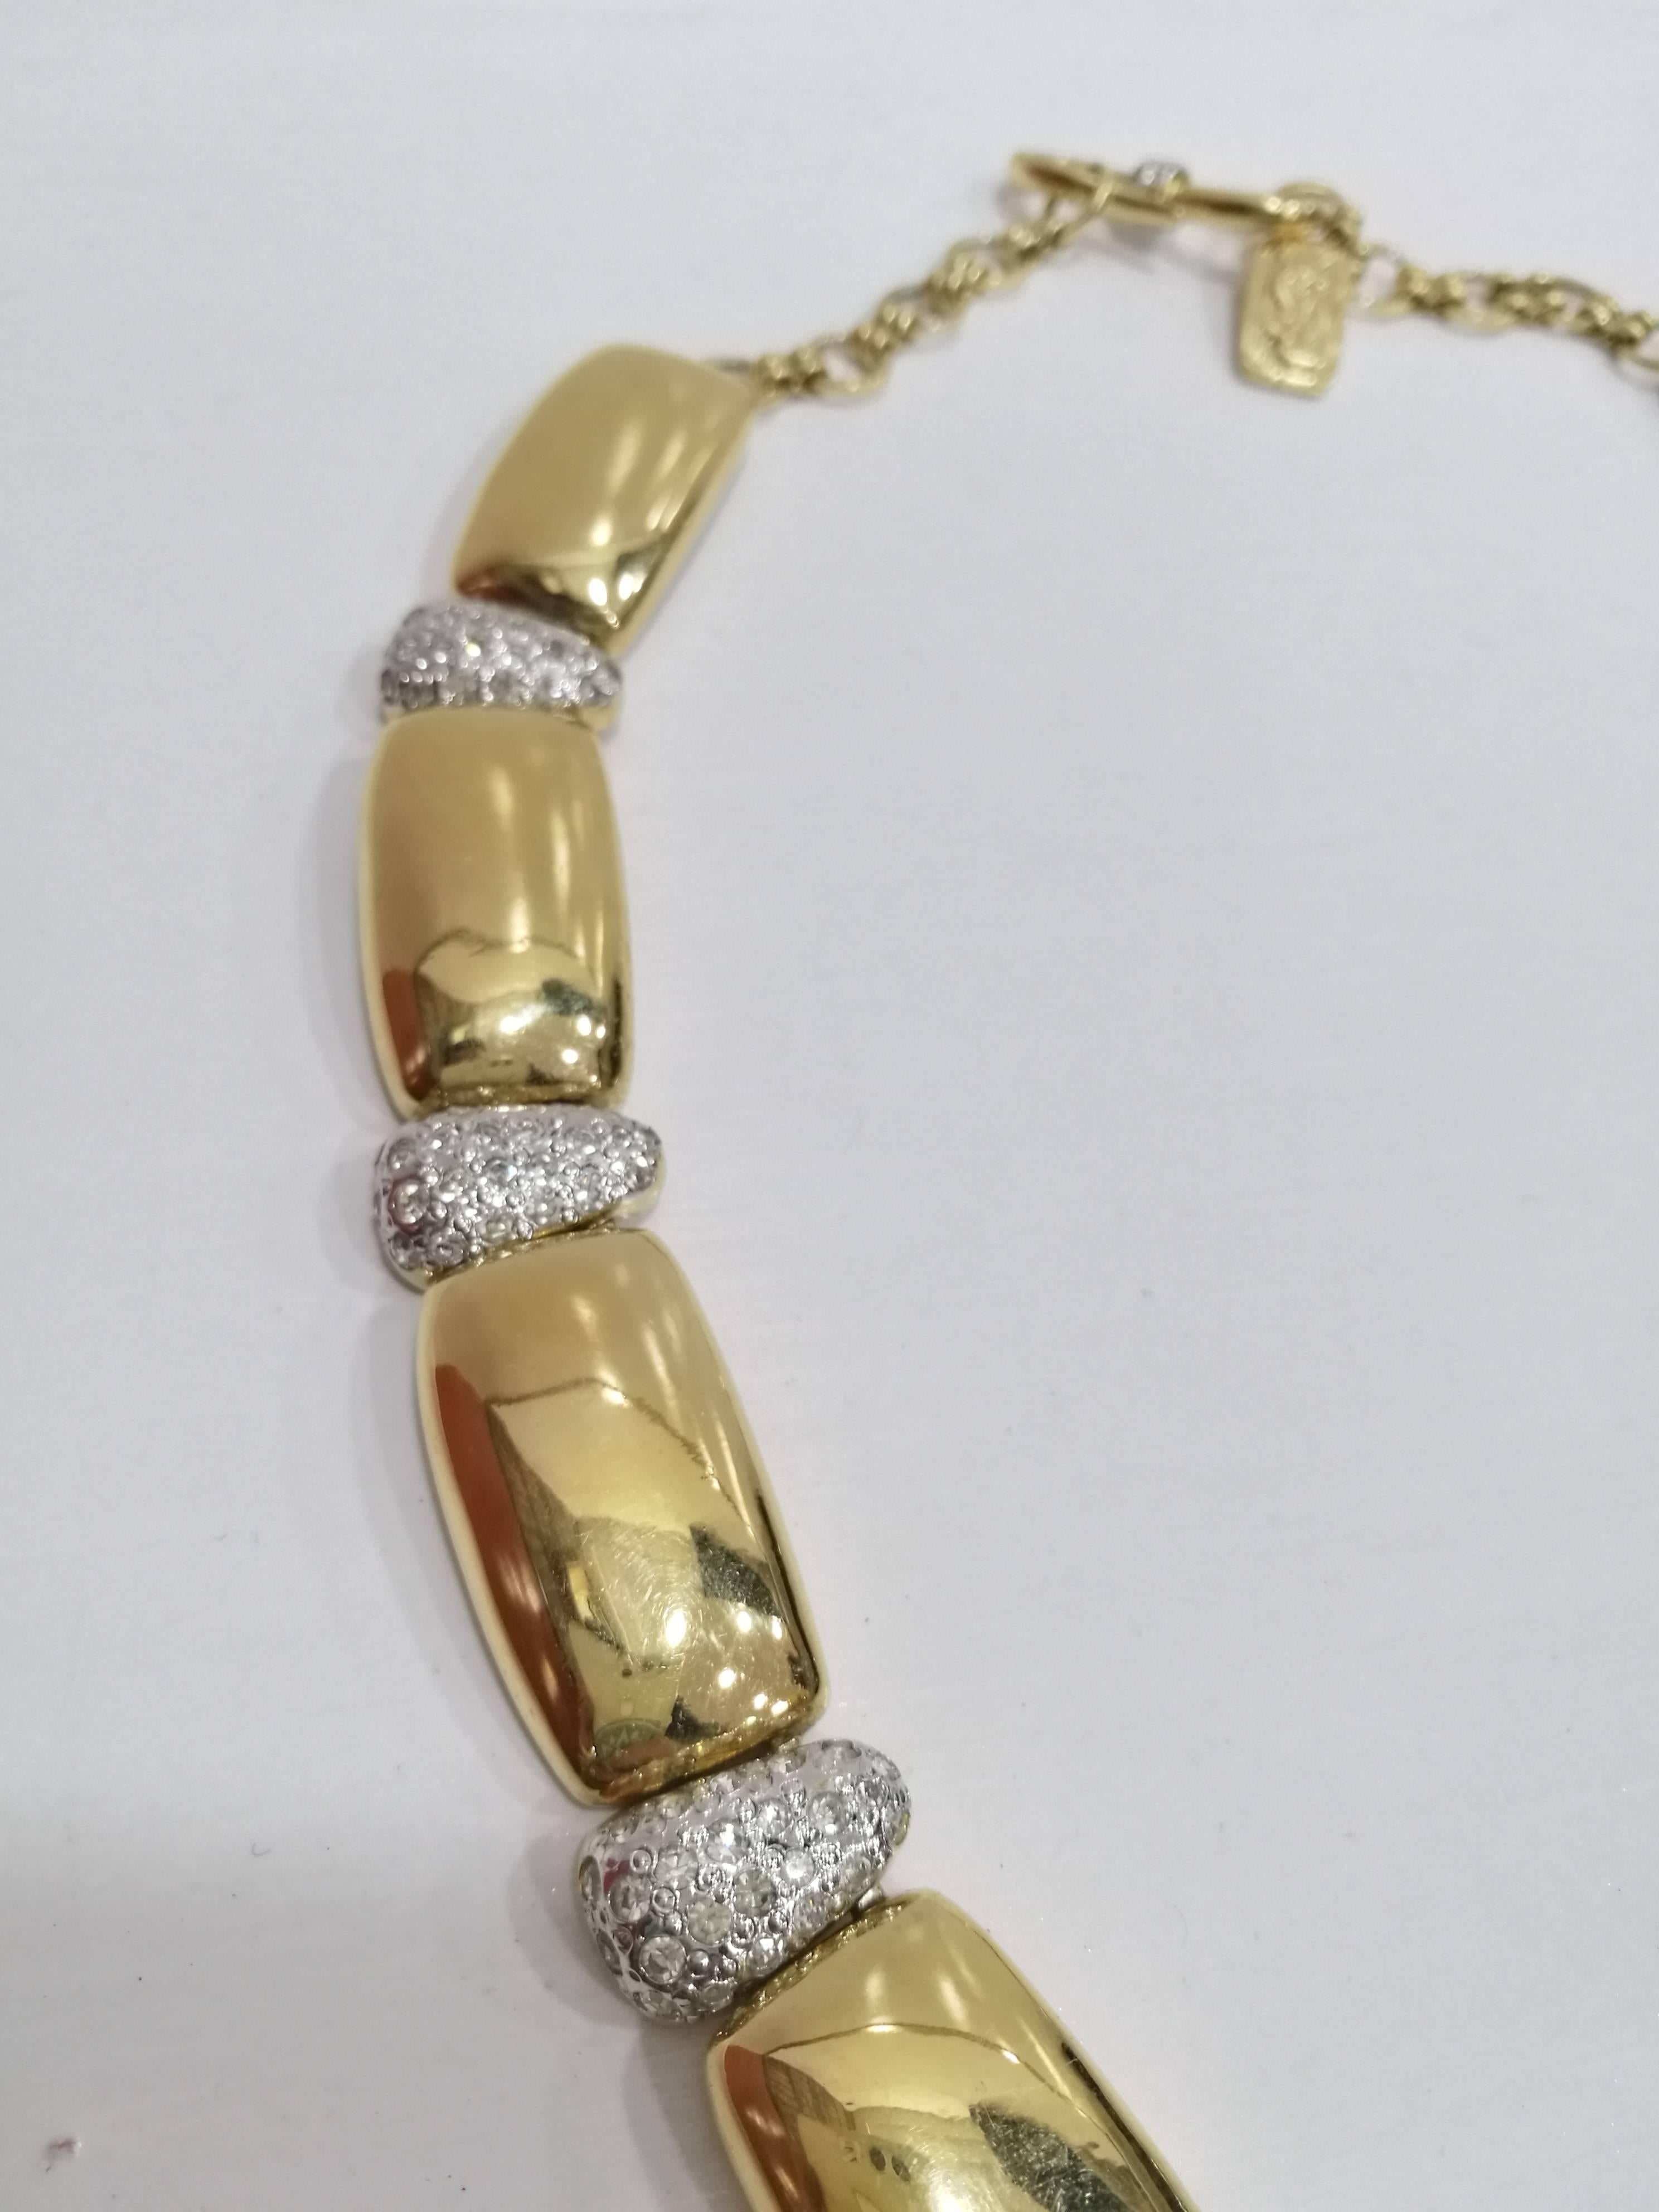 Yves Saint Laurent Necklace
Gold and silver tone necklace with crystal swarovski
Made in france